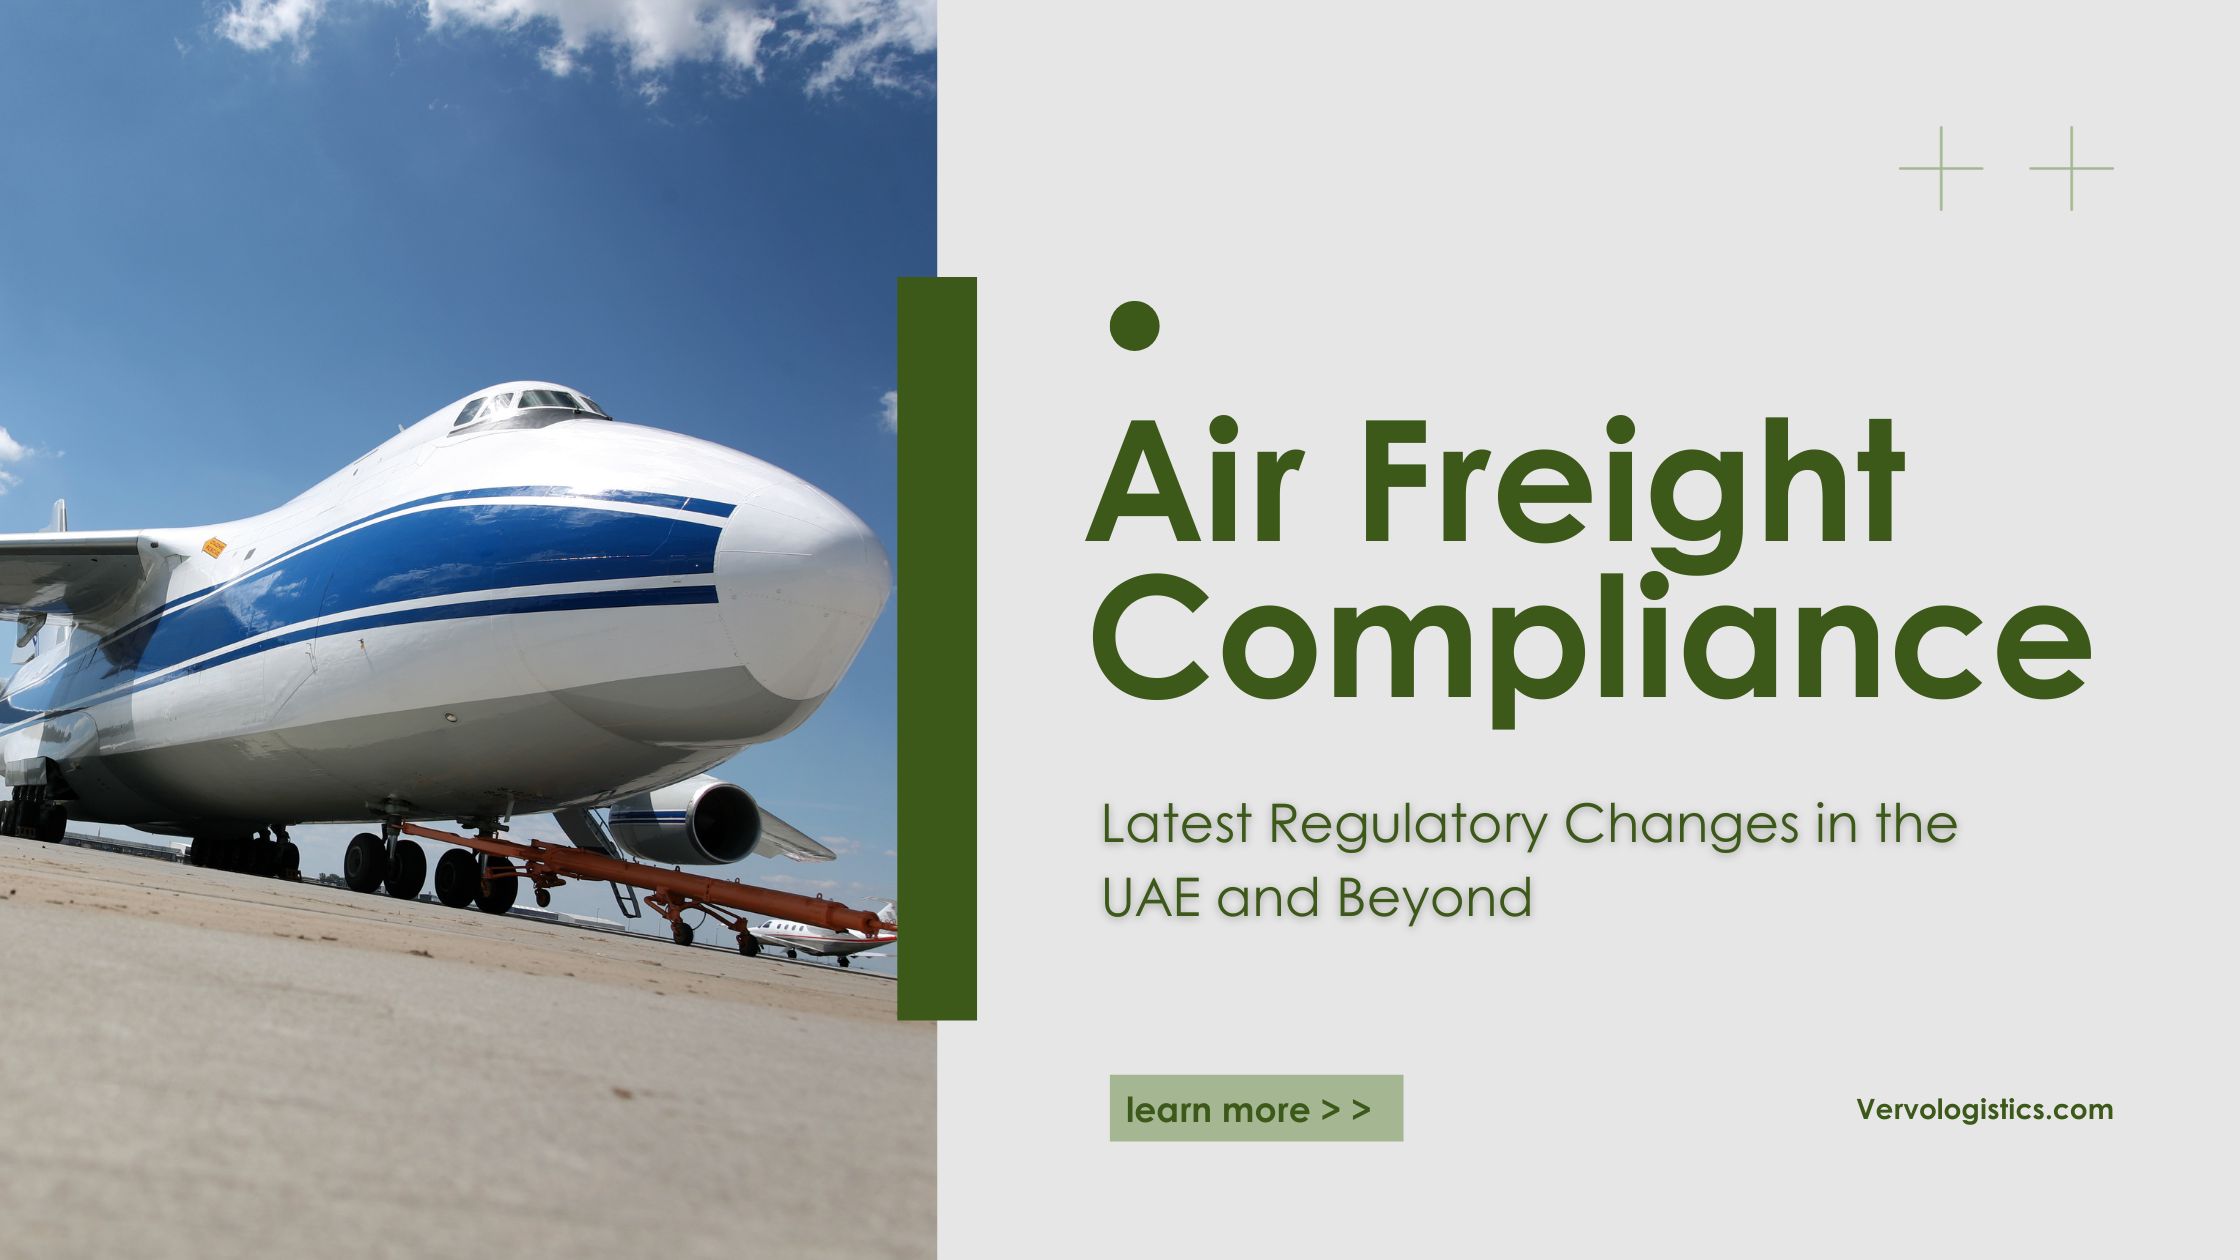 Latest Regulatory Changes in the UAE Air Freight Compliance and Beyond